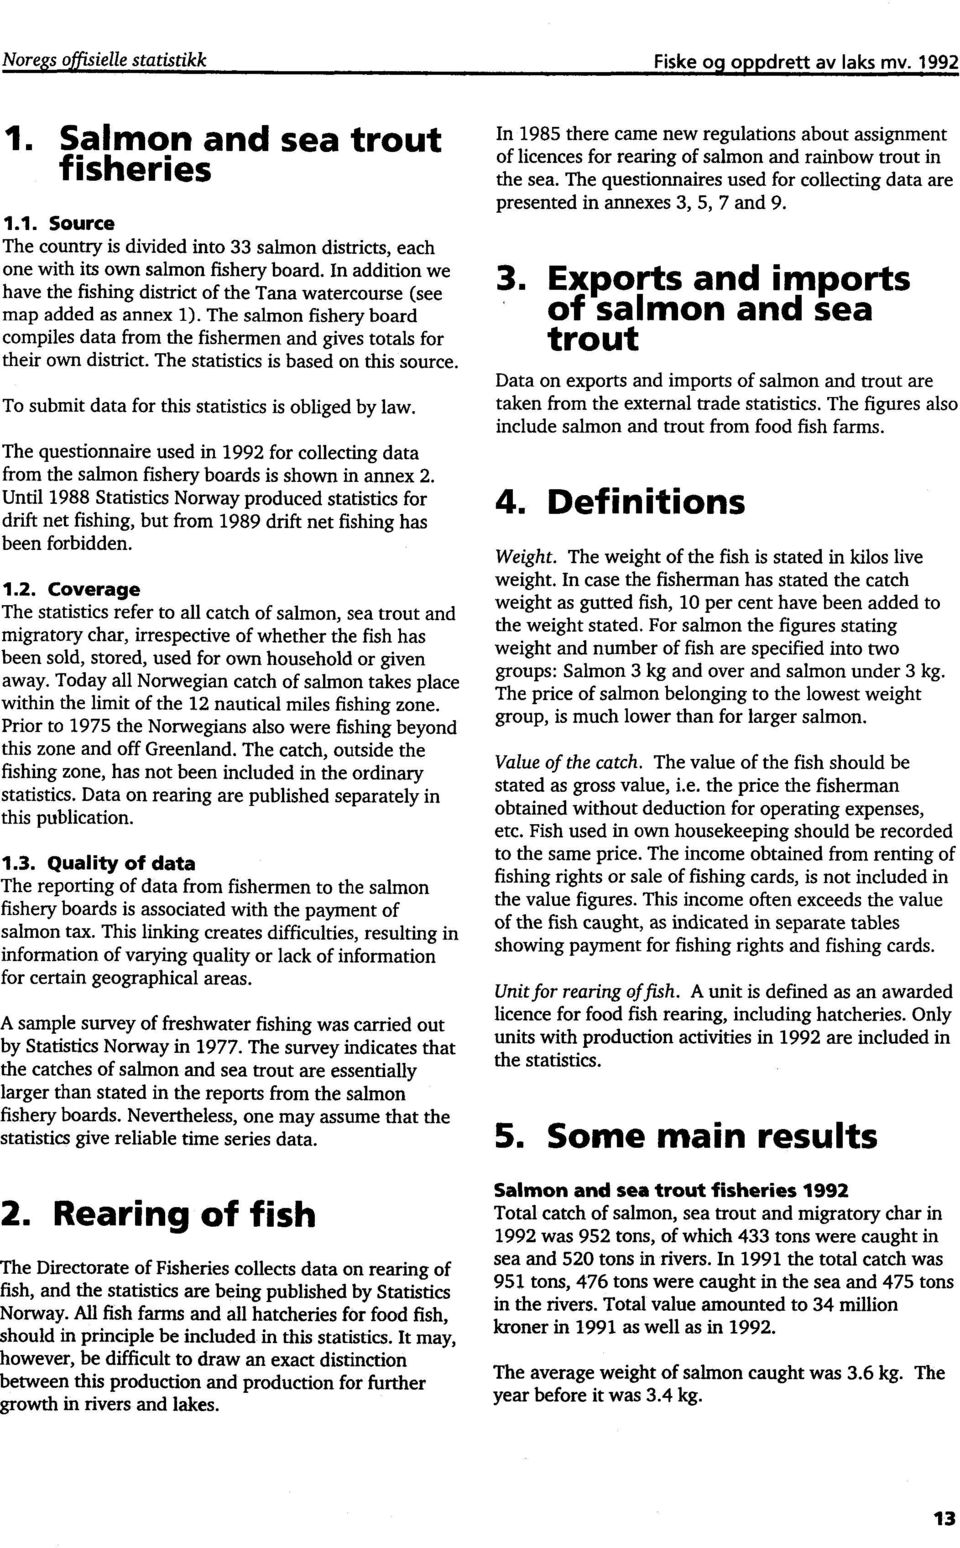 The statistics is based on this source. To submit data for this statistics is obliged by law. The questionnaire used in 1992 for collecting data from the salmon fishery boards is shown in annex 2.